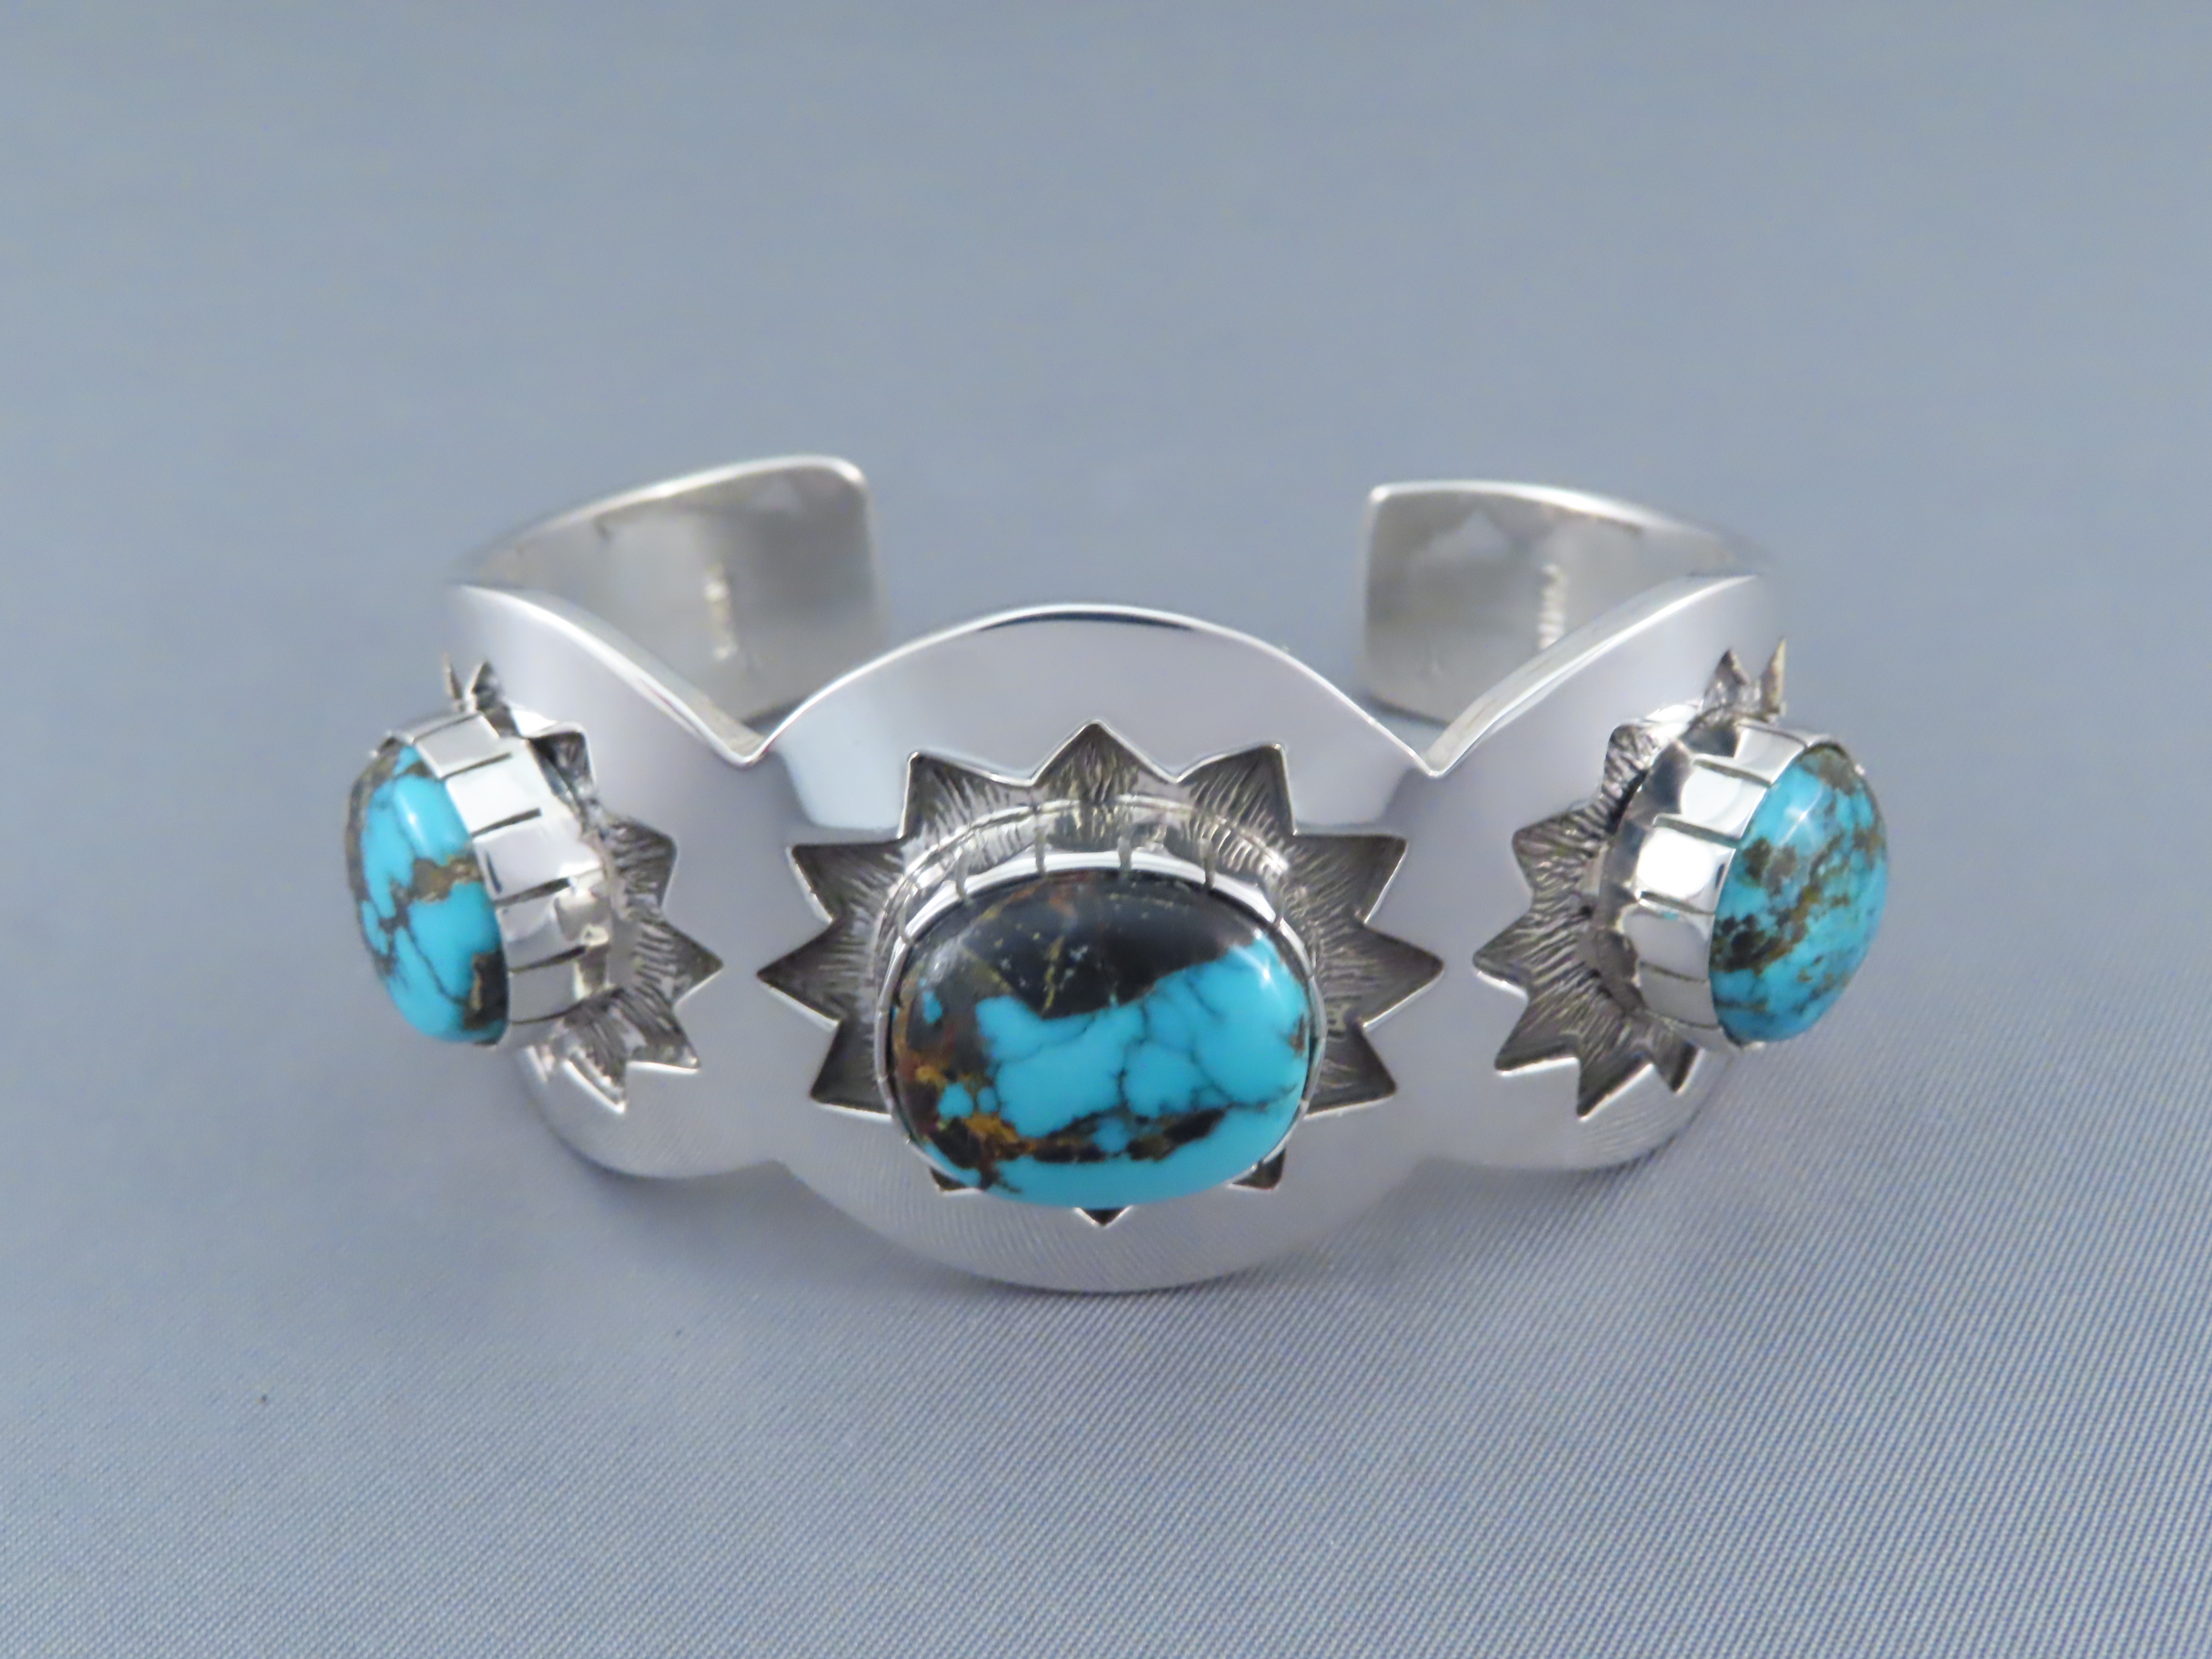 Apache Blue Turquoise Cuff Bracelet by Fortune Huntinghorse - Turquoise